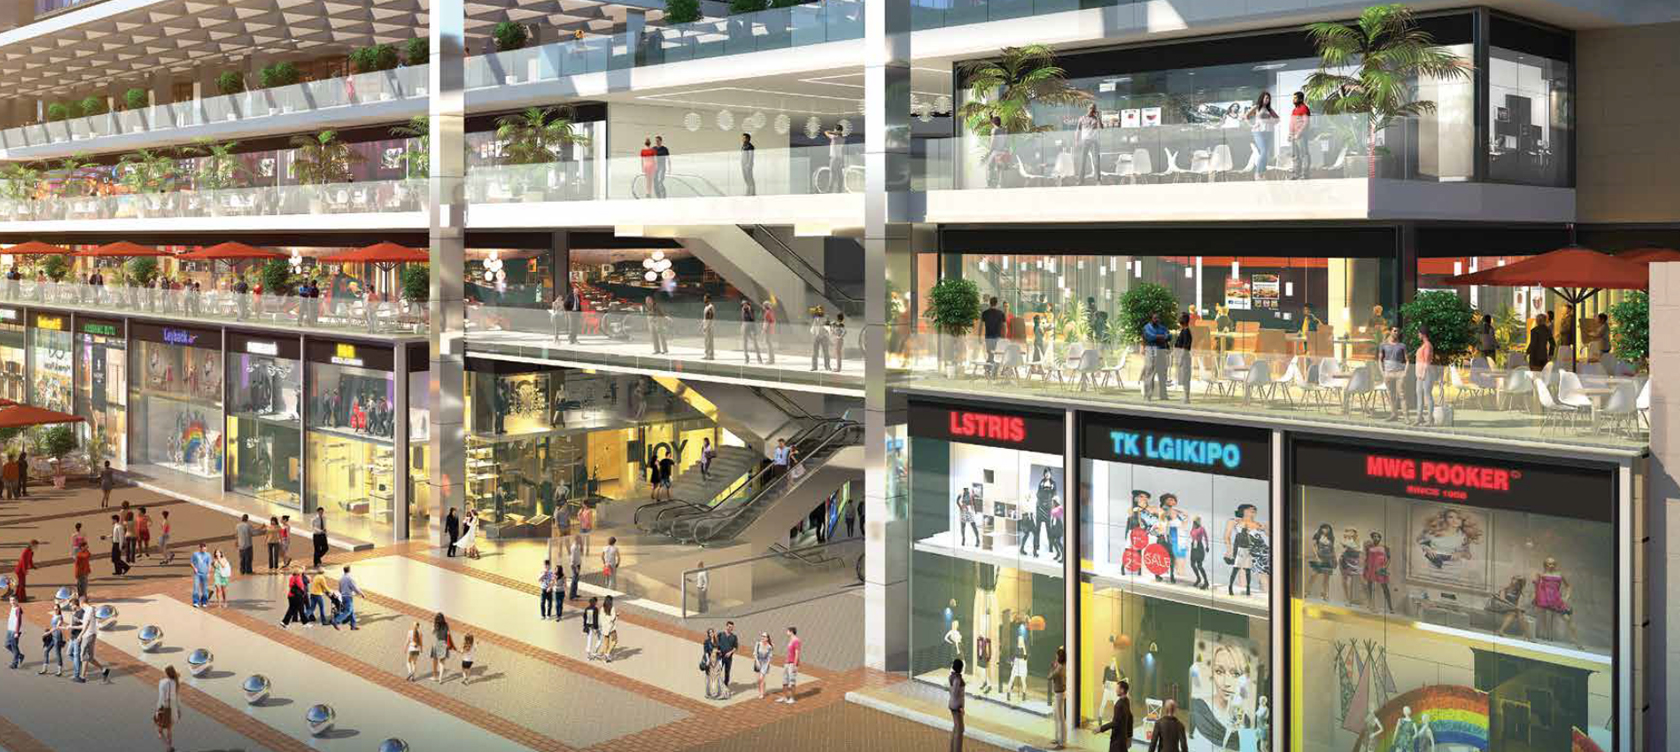 M3M Broadway Sector 71 Gurgaon | Retail Shops, Multiplex, Food courts, serviced apartment in Gurgaon